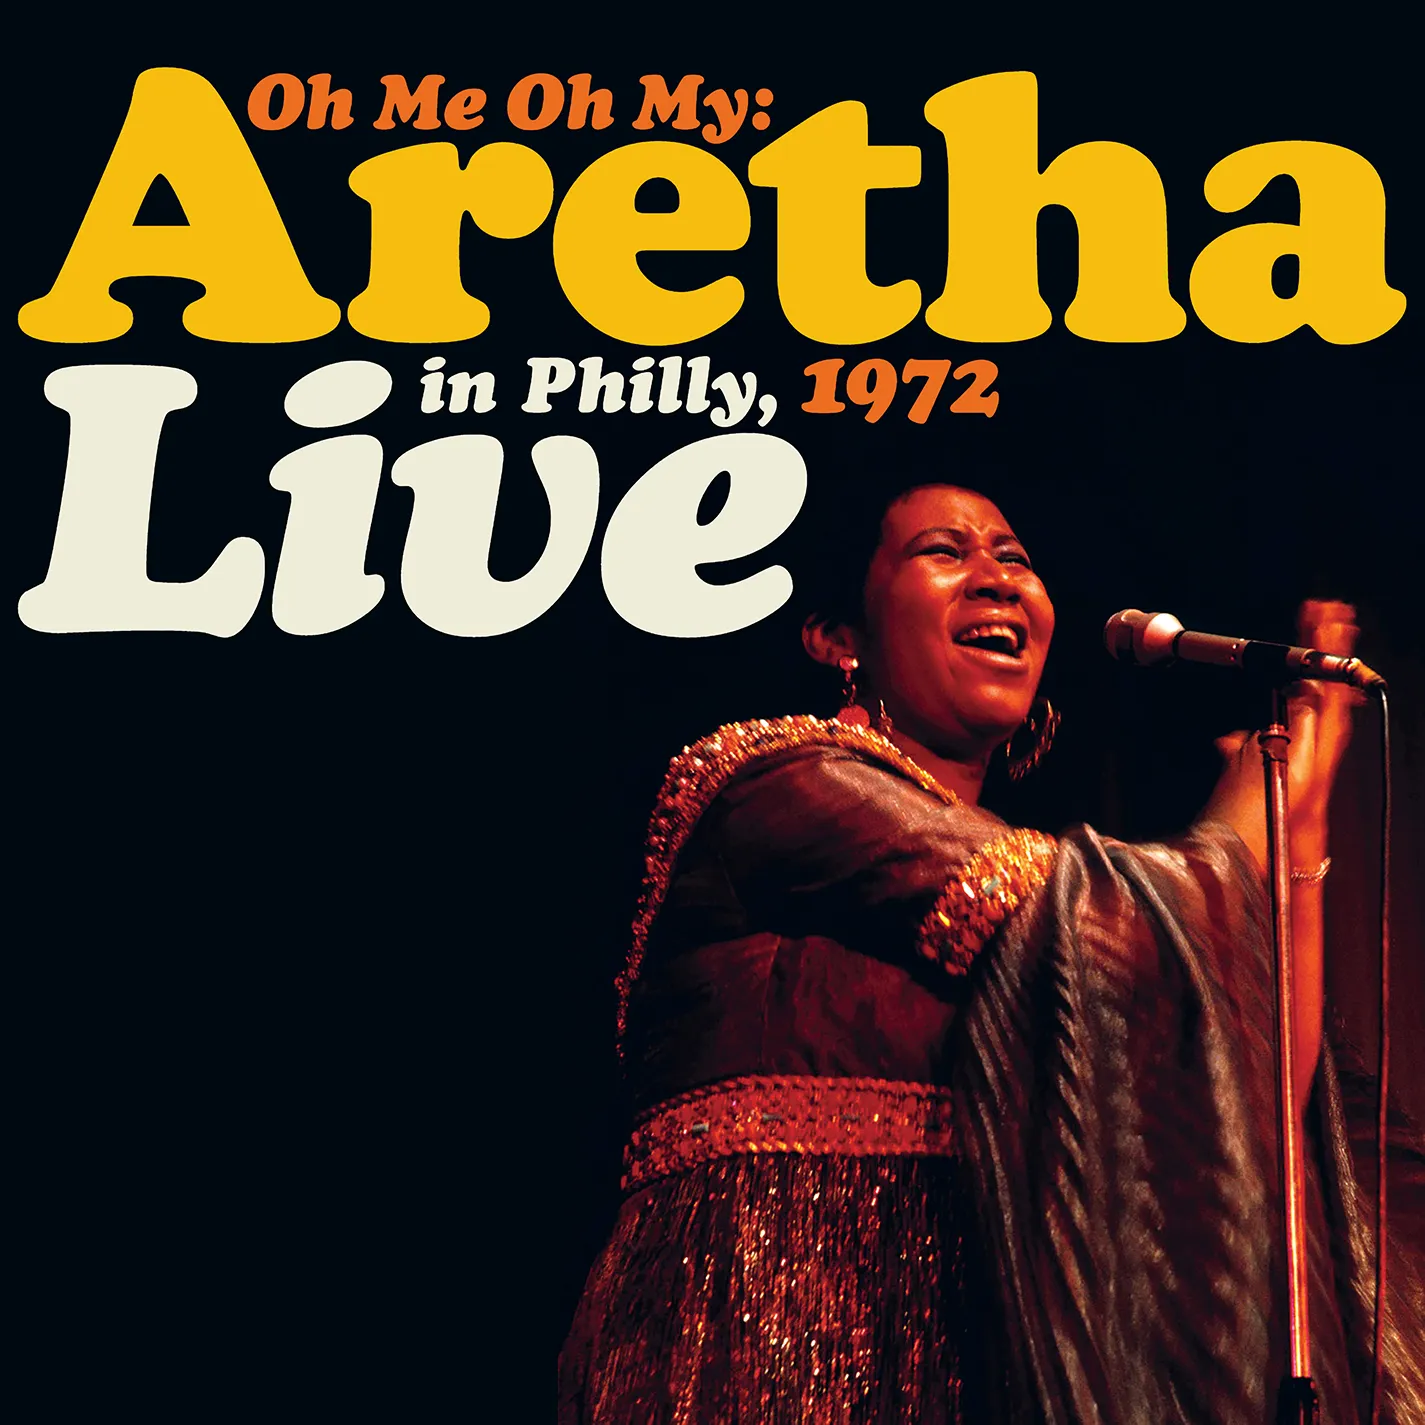 Aretha Franklin - Oh Me Oh My: Aretha Live in Philly 1972 [RSD Drops 2021]